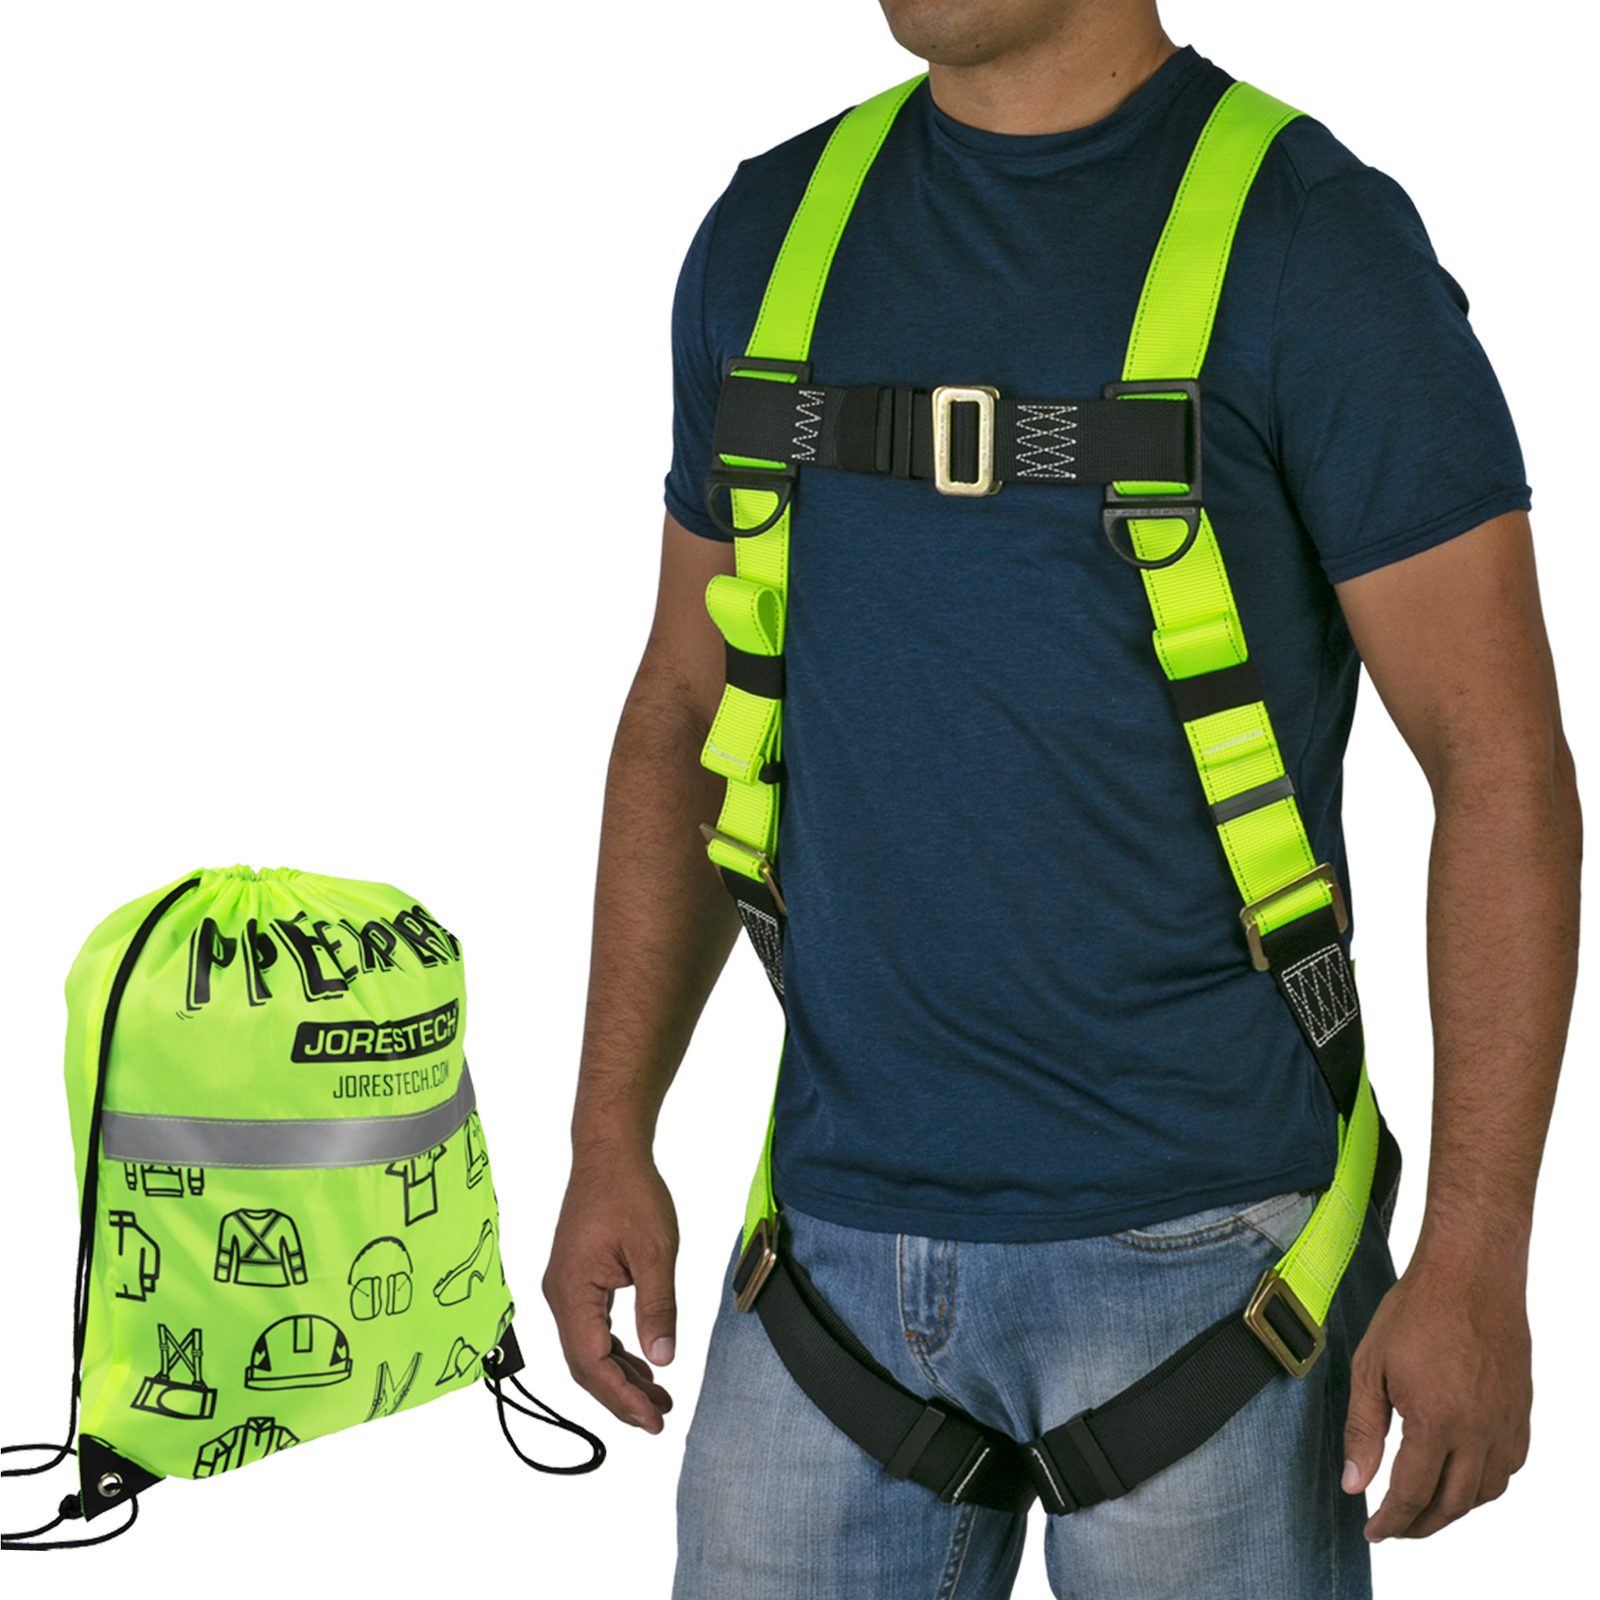 Front view of the torso of a person wearing the hi-vis yellow and black 1D fall protection safety body JORESTECH harness. There is also a lime hi-vis string bag that comes included with the harness